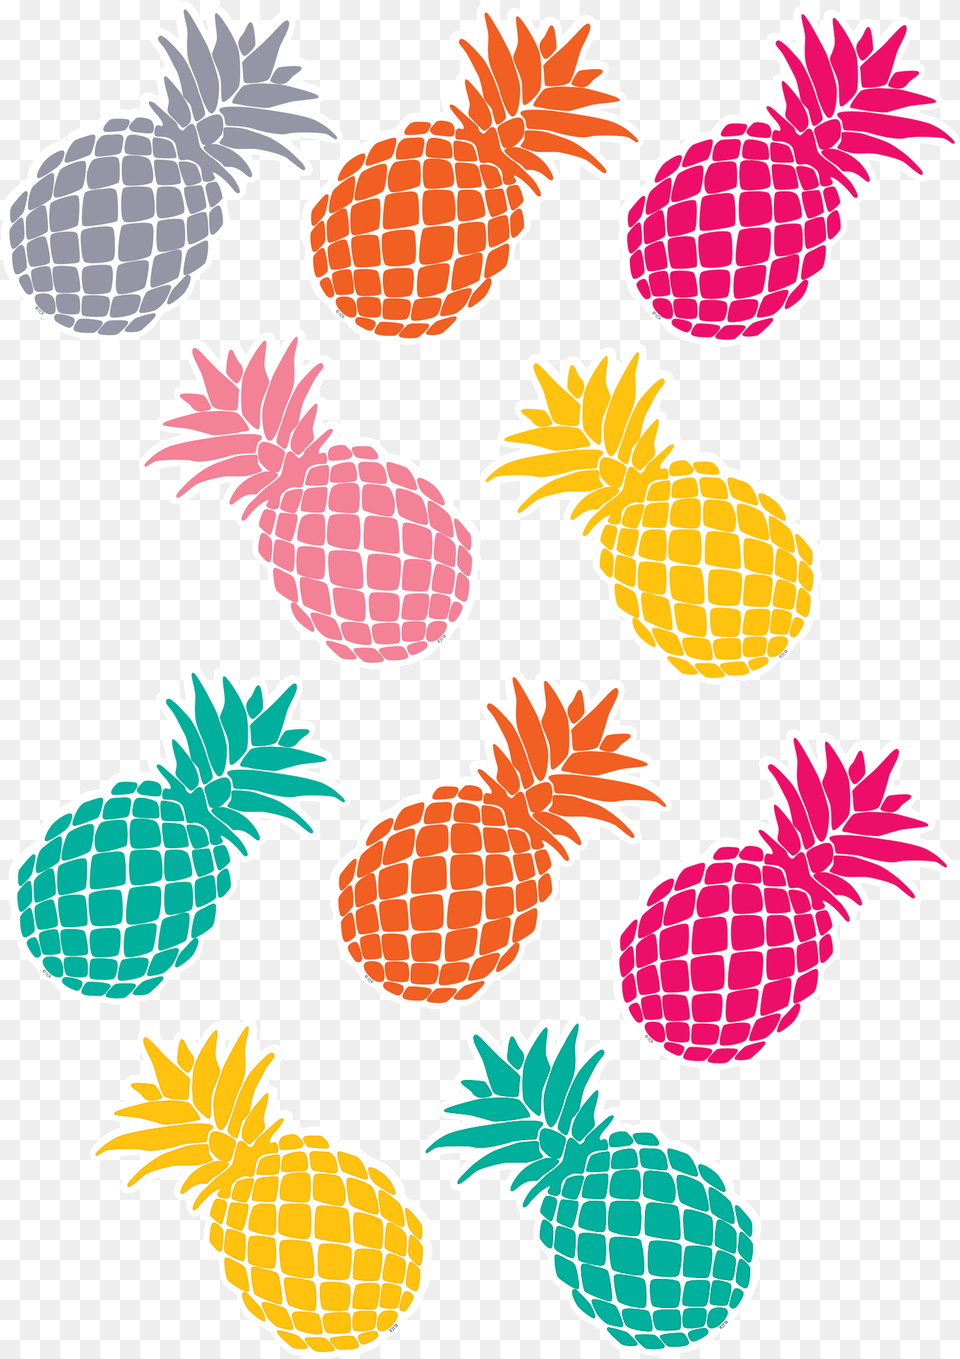 Clipart House Pineapple Transparent Small Pineapple Name Tags, Art, Graphics Png Image